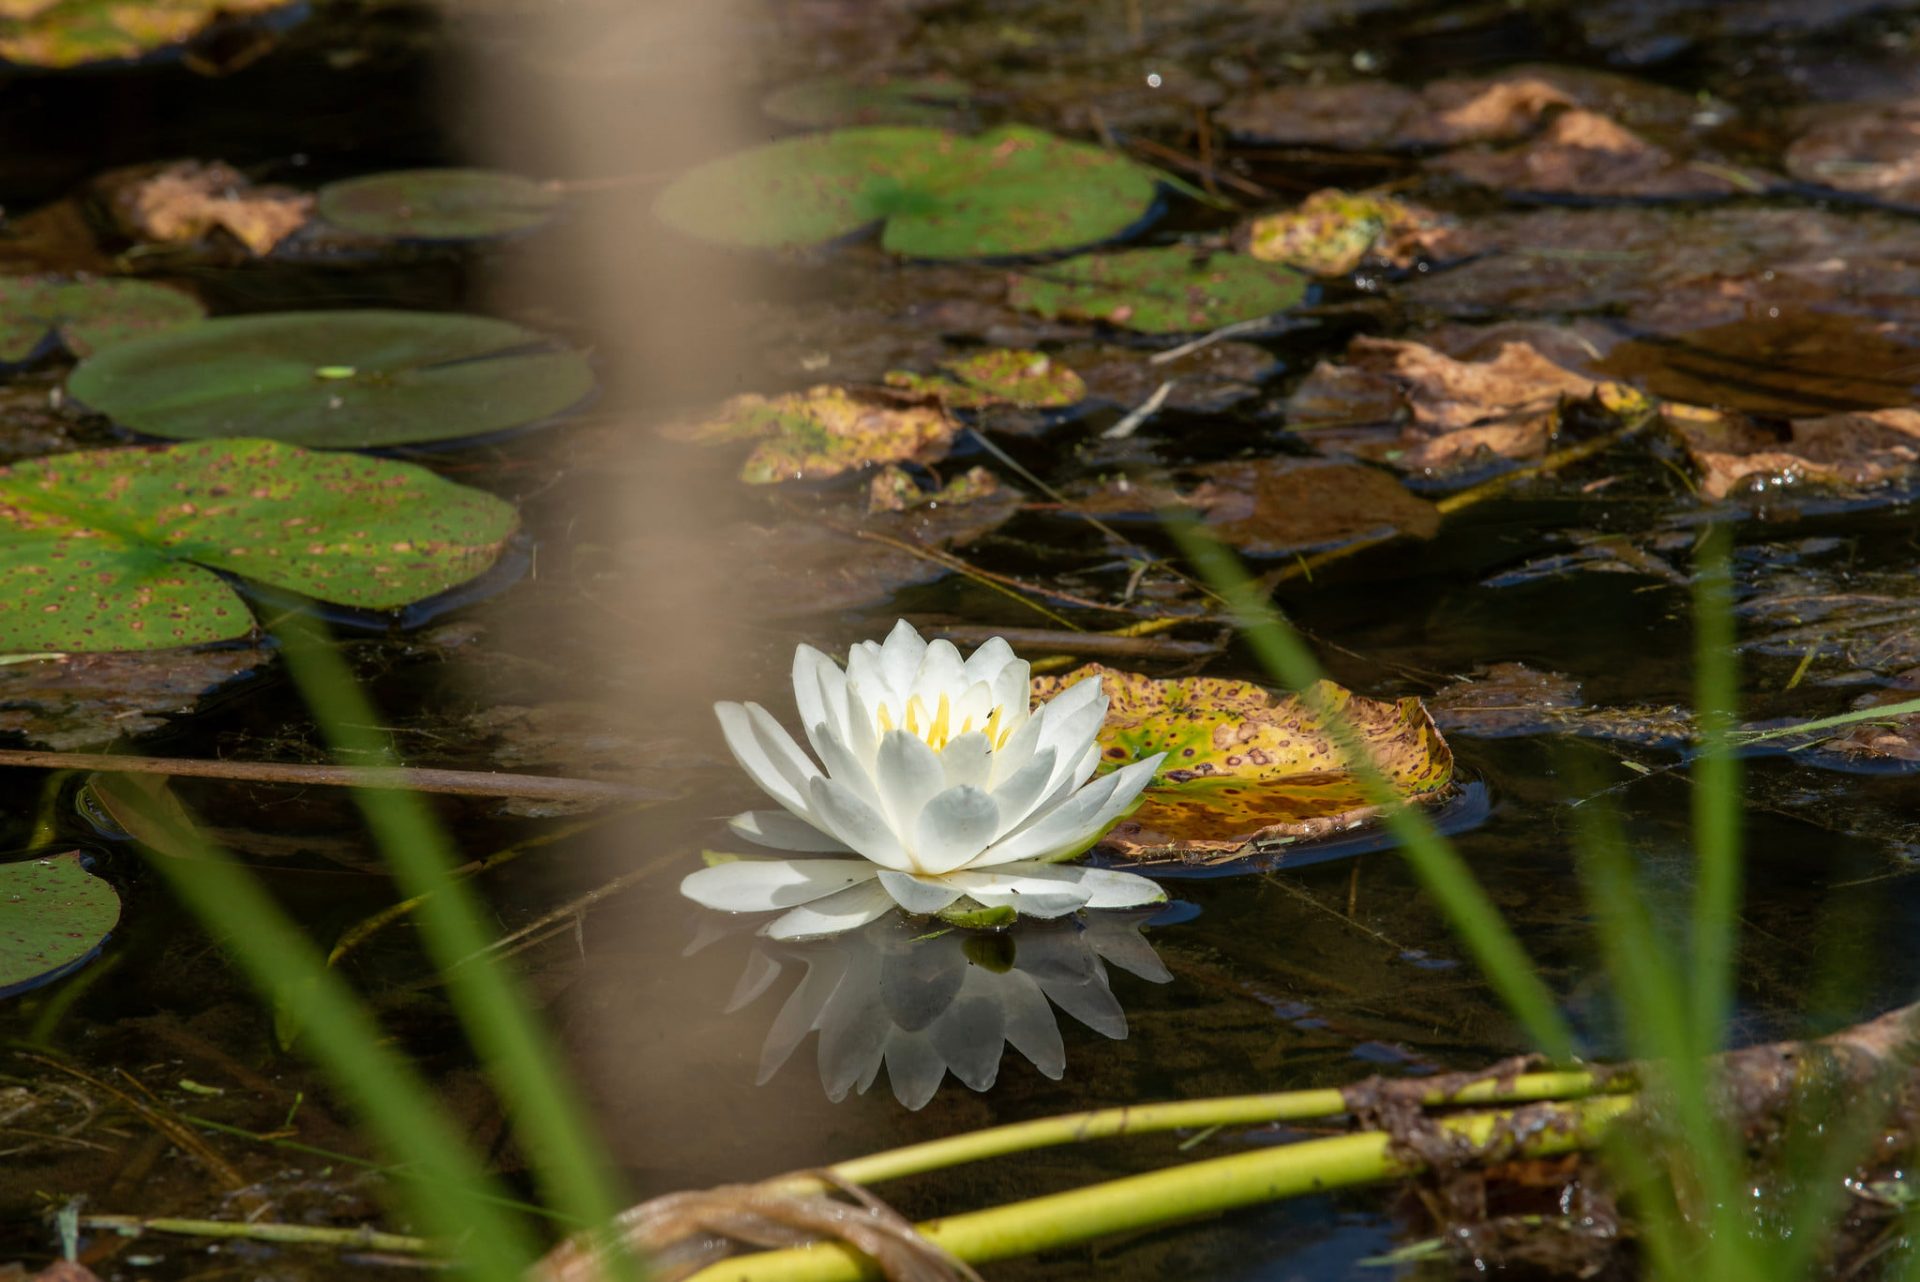 A lotus in the pond.